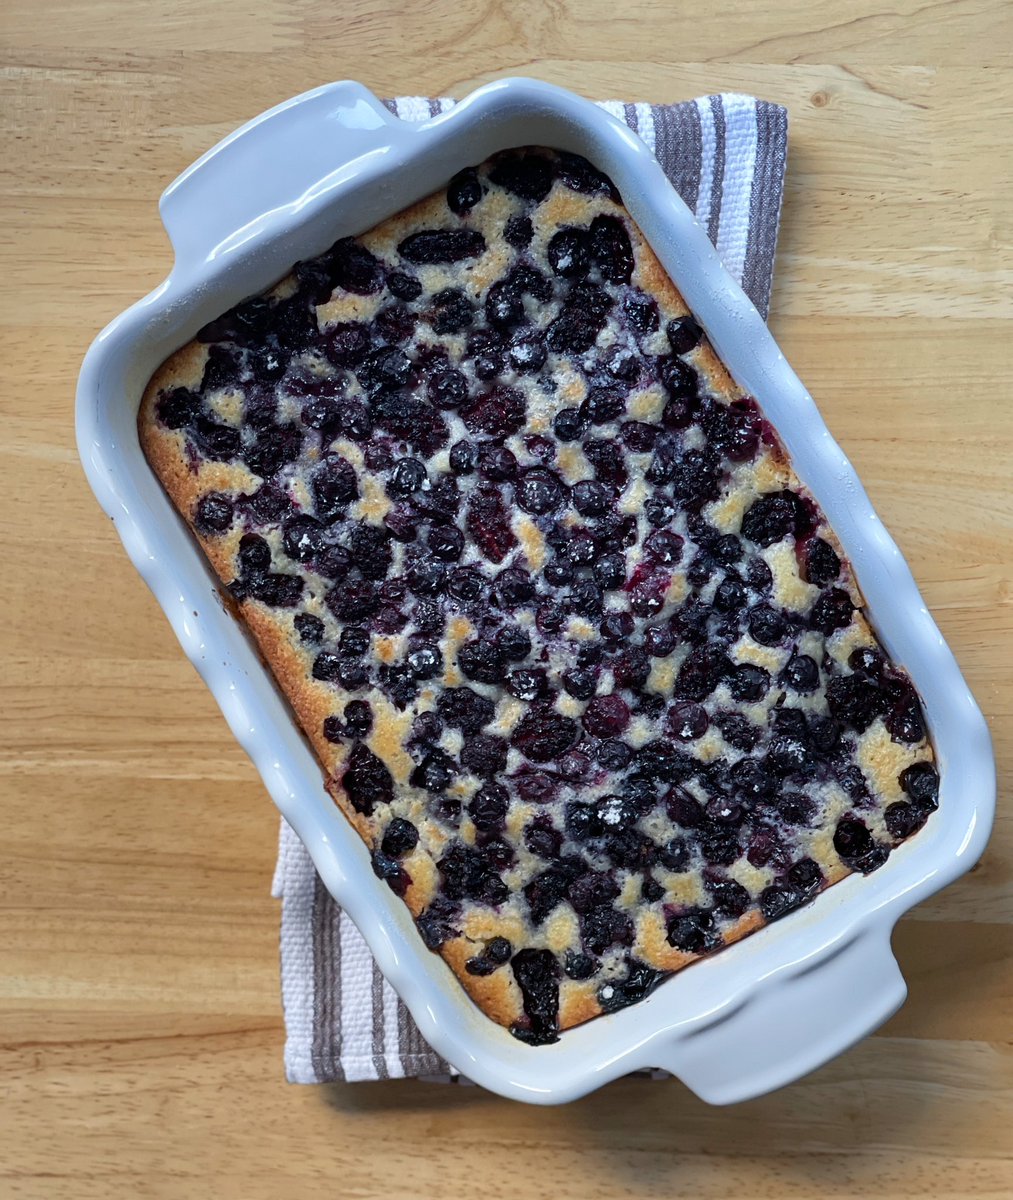 Made a blackberry and blueberry cobbler.